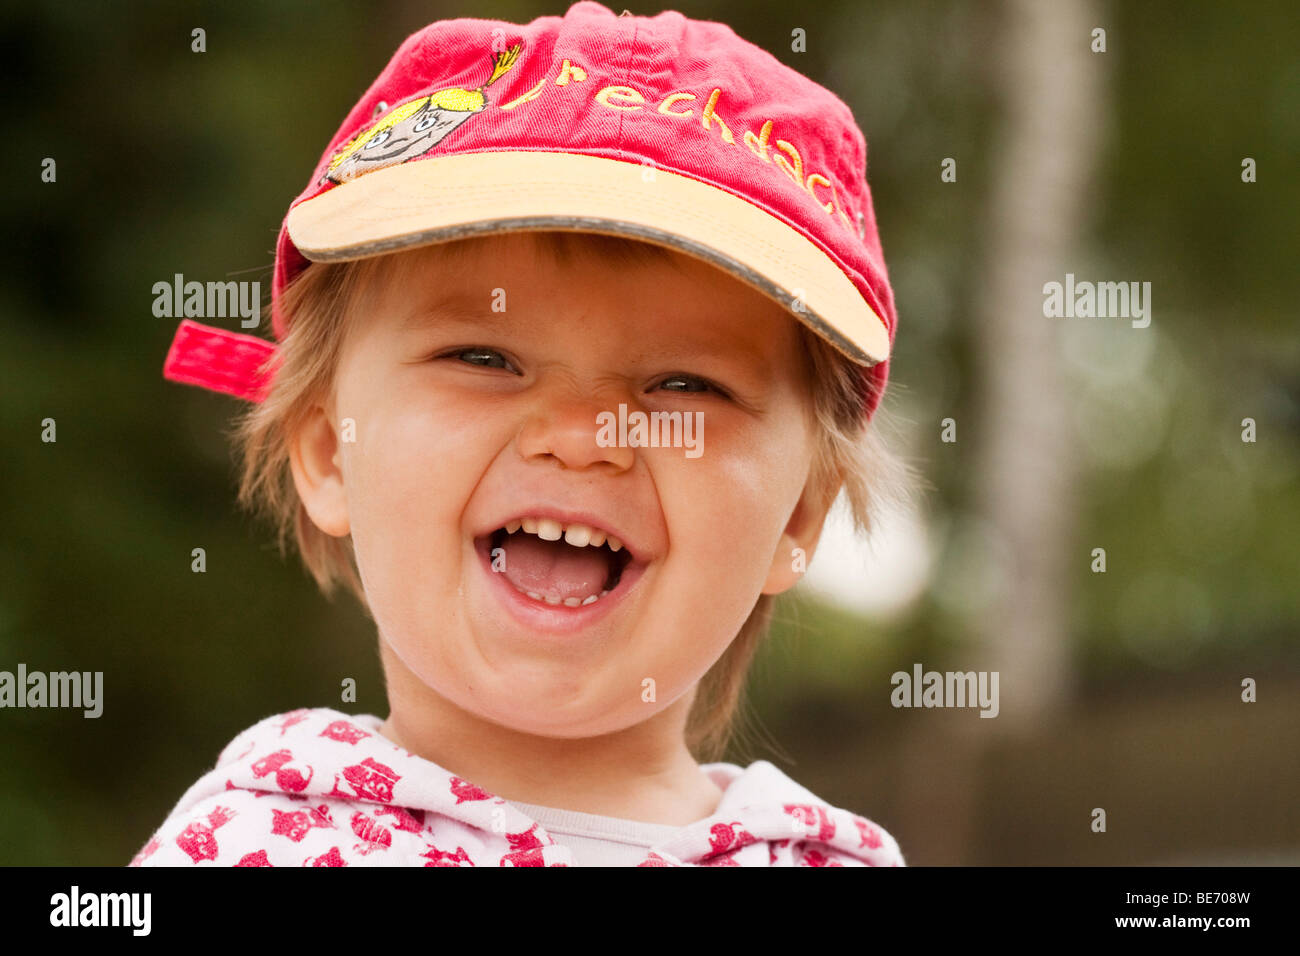 Girl, 2, laughing, portrait Stock Photo